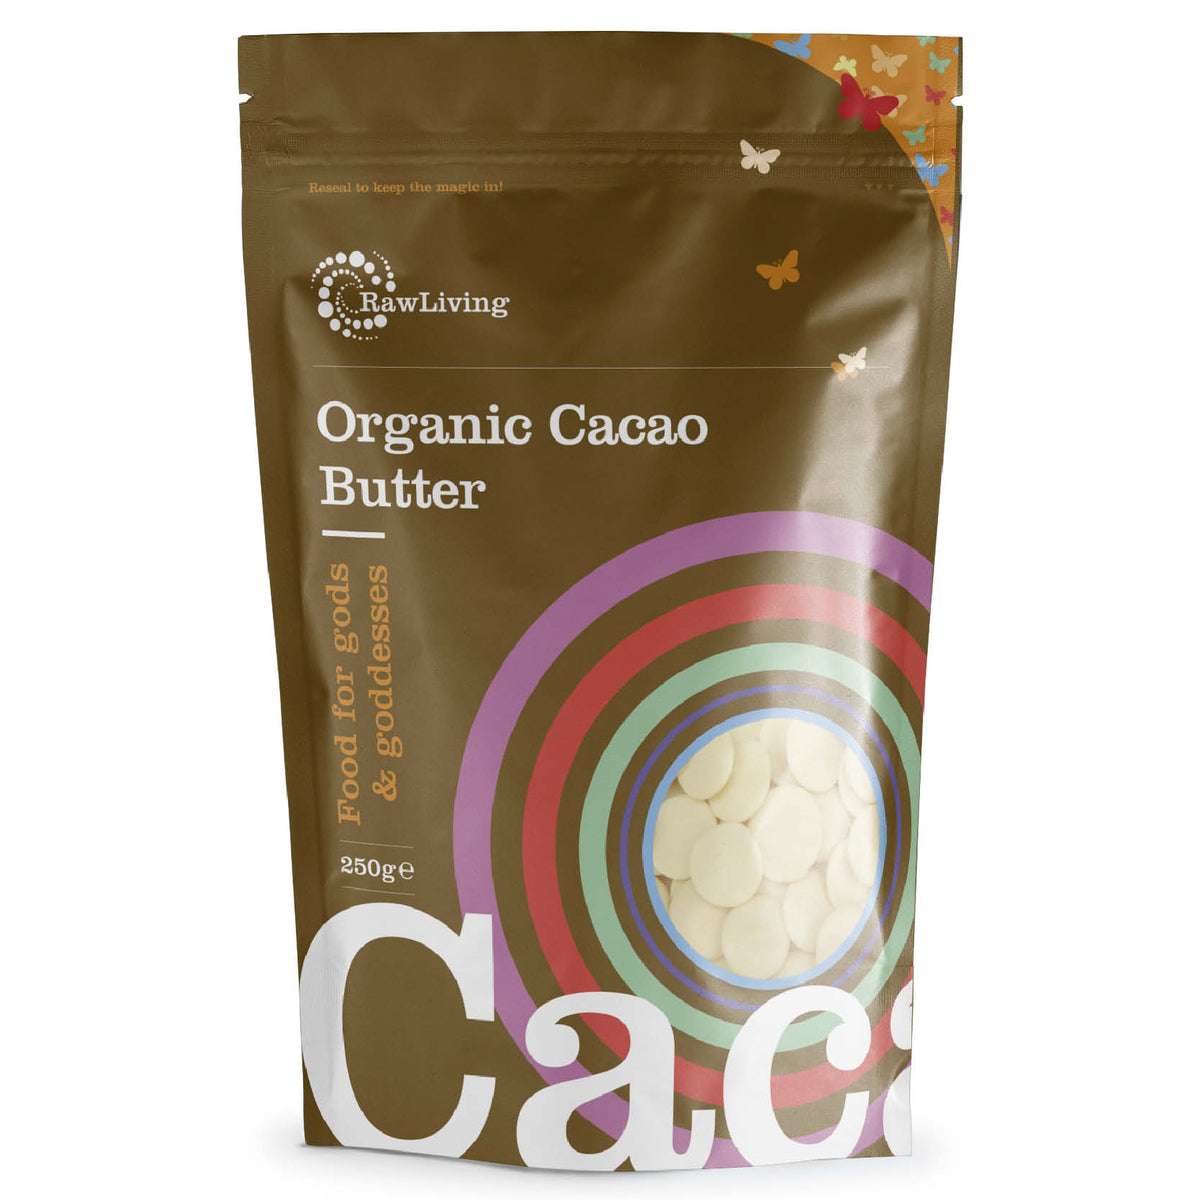 Organic Cacao Butter Peruvian | Raw Living UK | Raw Foods | Super Foods | Raw Living Organic Unroasted Peruvian Cacao Butter is like a cacao flavoured coconut oil with a white chocolate flavour. Use to make chocolate bars &amp; treats.